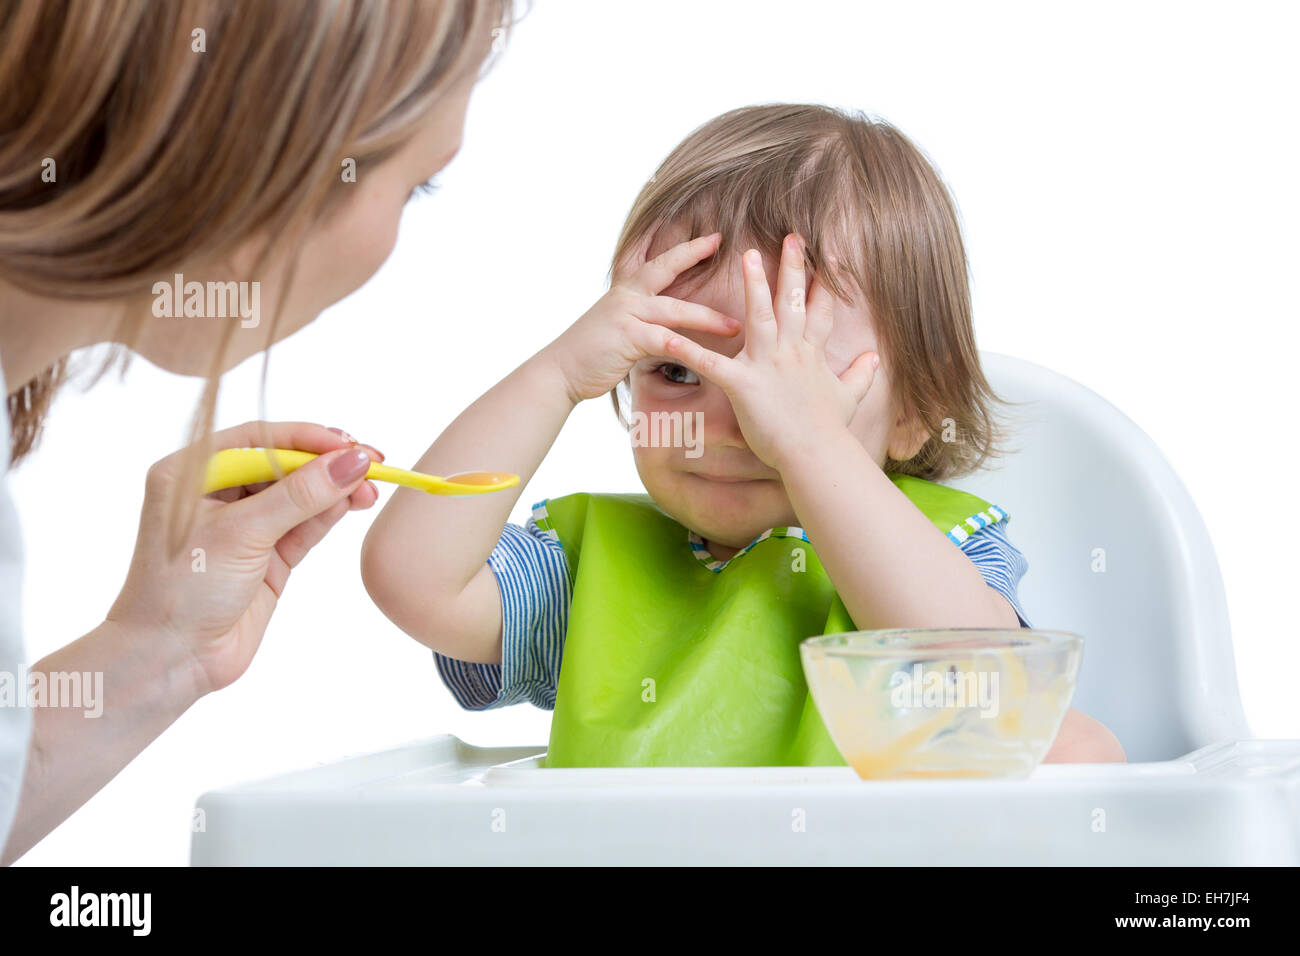 Child boy refuses to eat closing face by hands Stock Photo